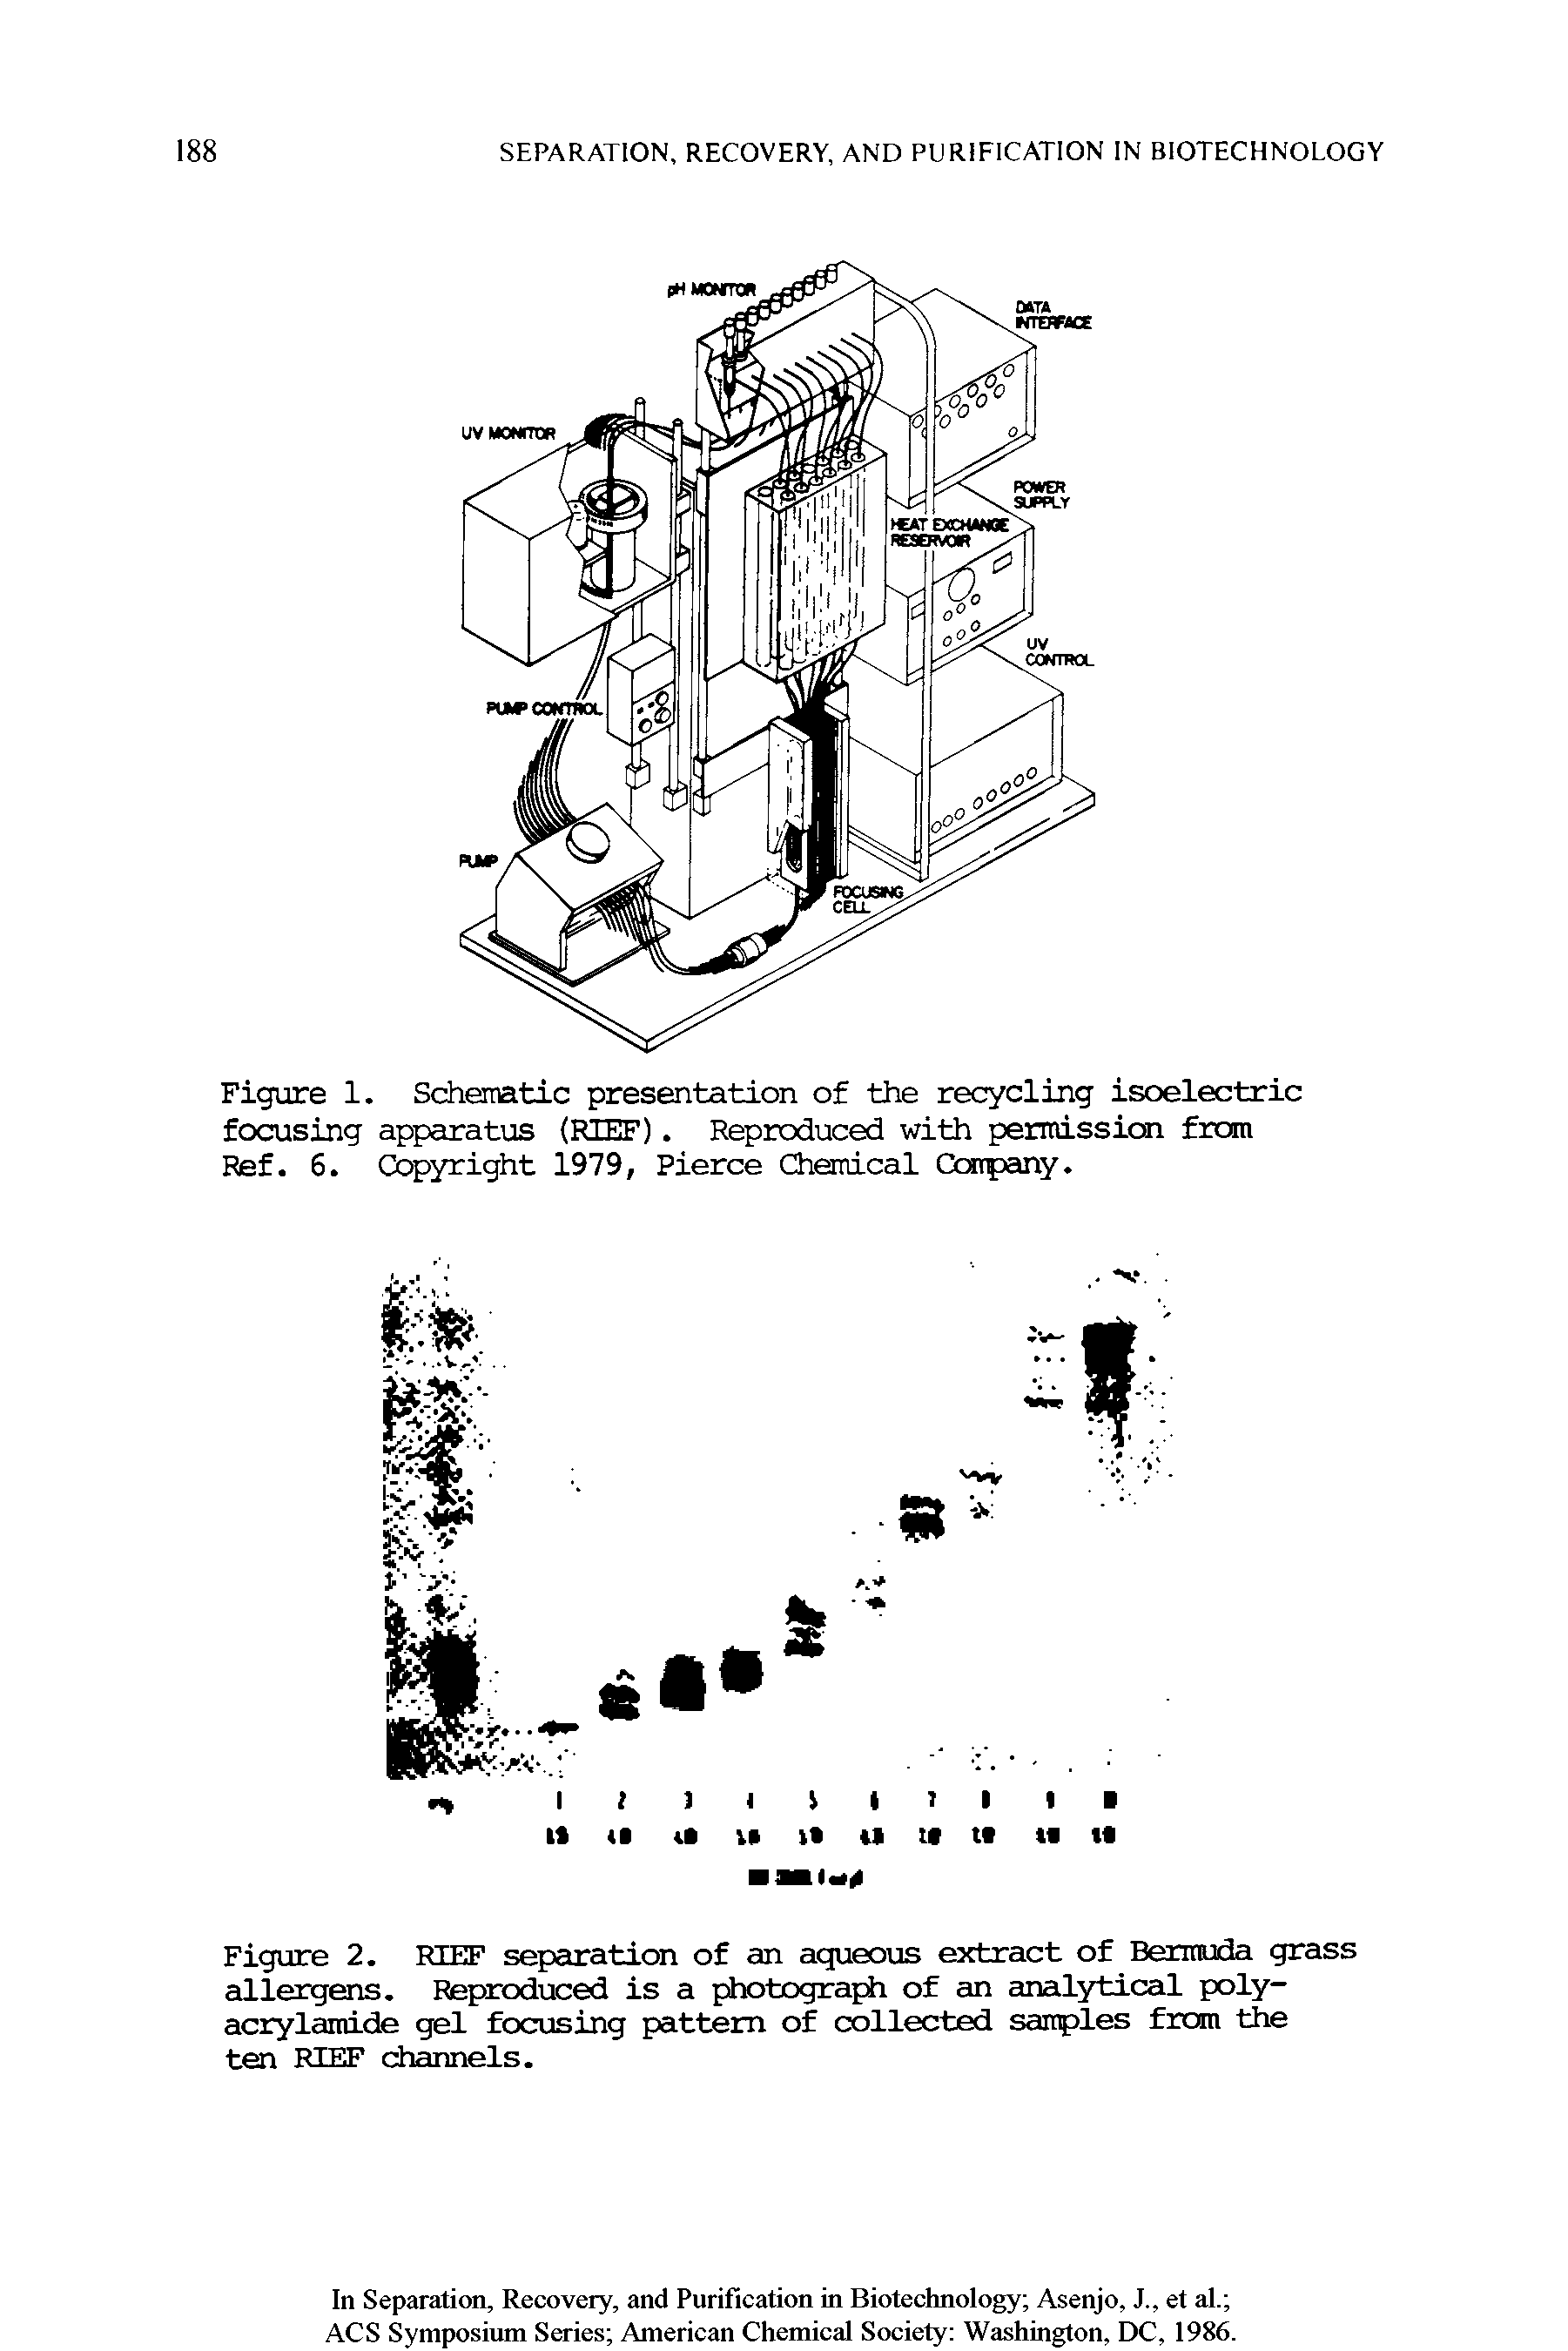 Figure 1. Schematic presentation of the recycling isoelectric focusing apparatus (RIEF). Reproduced with permission from Ref. 6. Copyright 1979, Pierce Chemical Company.